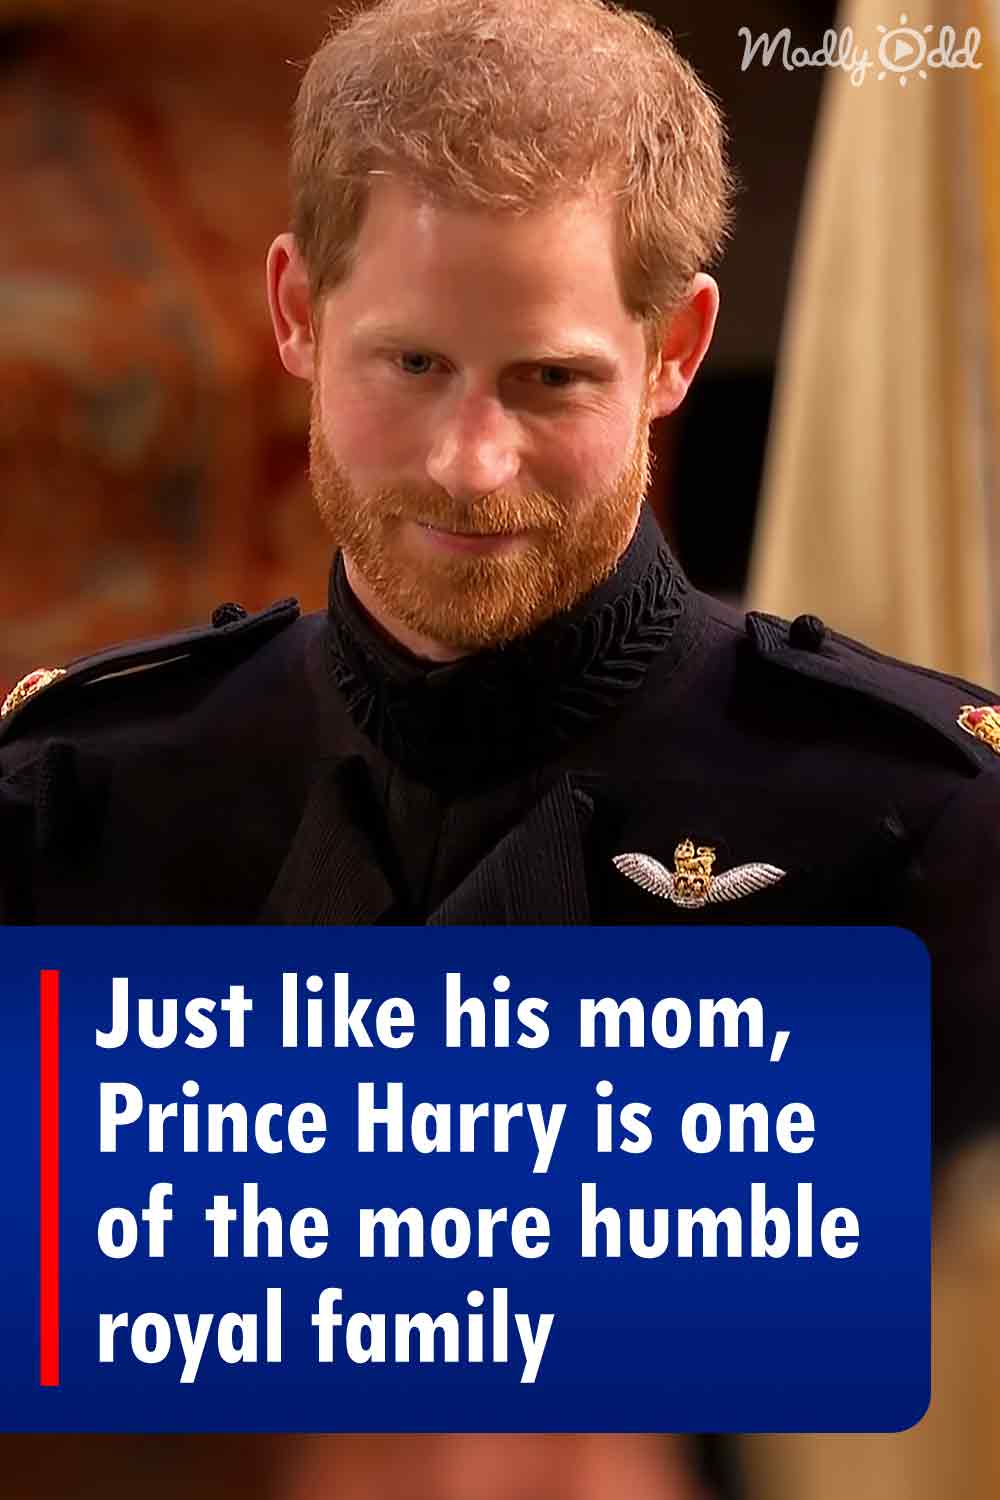 Just like his mom, Prince Harry is one of the more humble royal family members